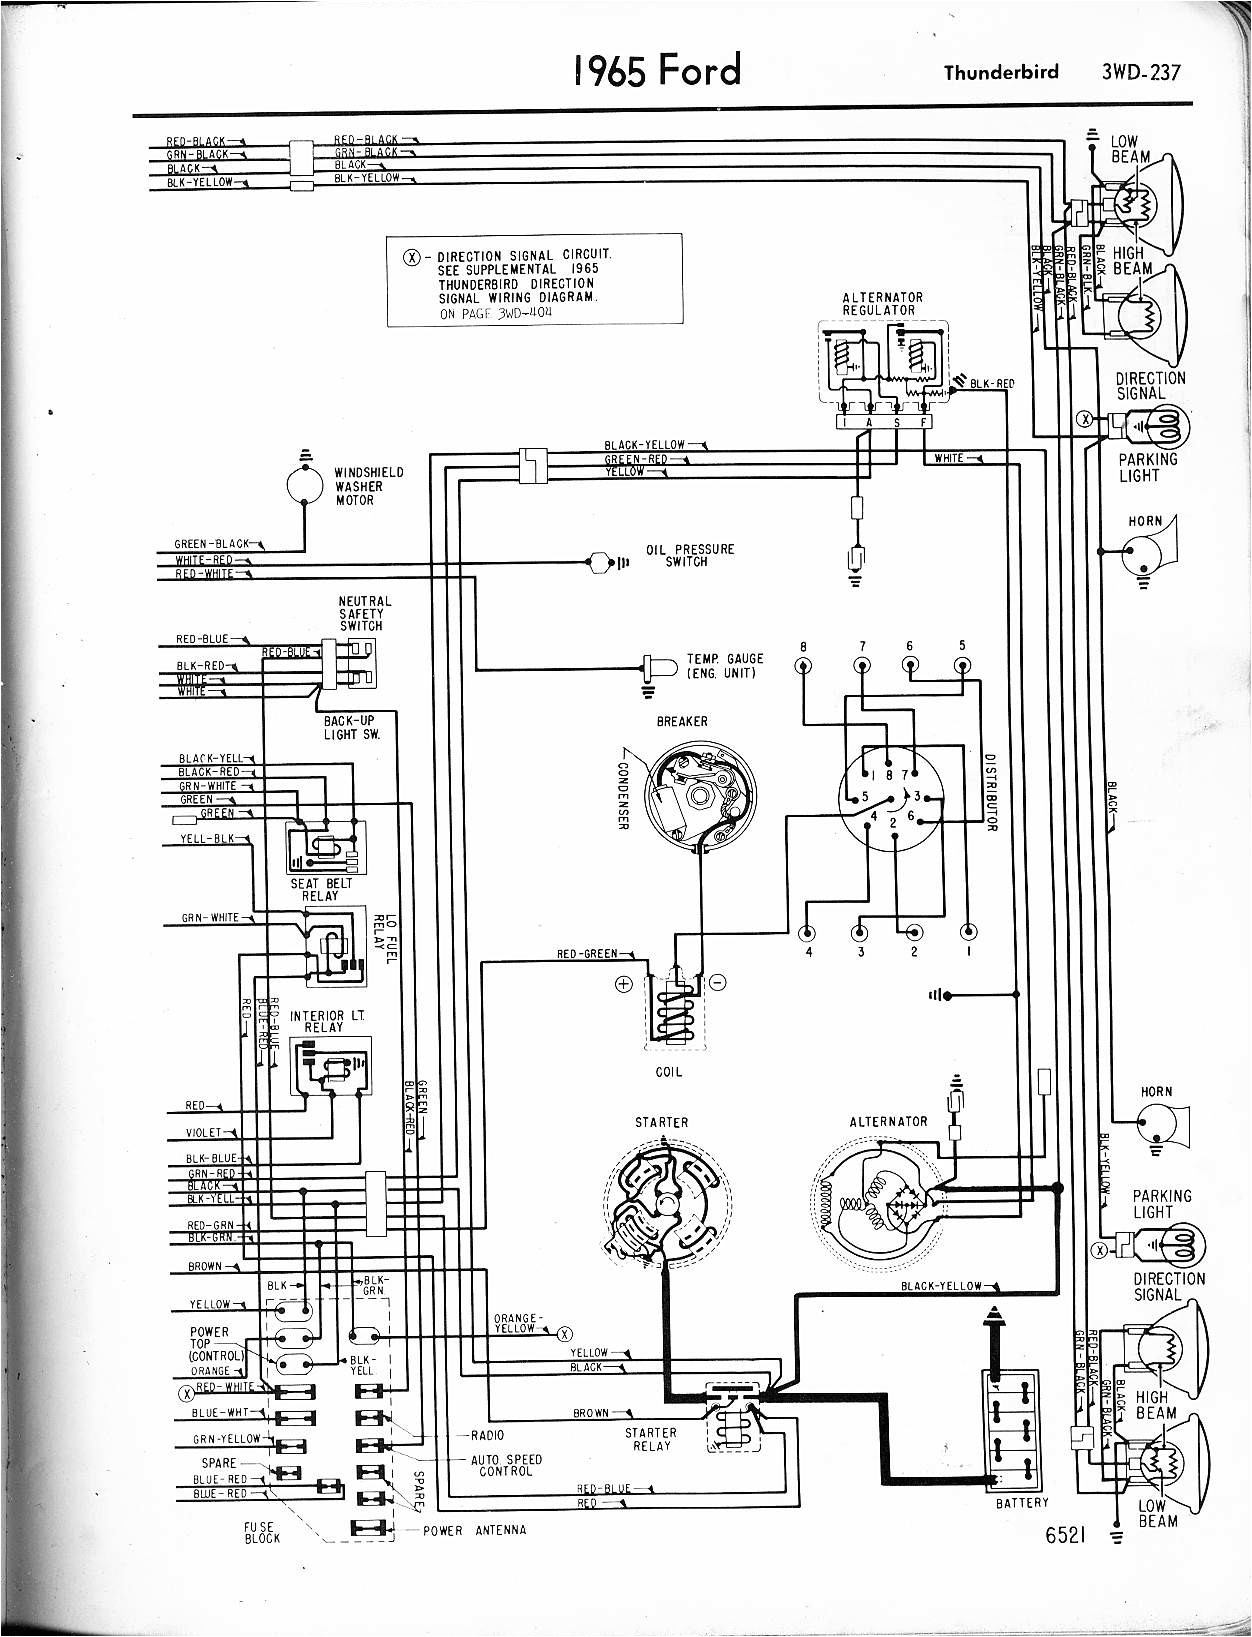 ford wiring diagrams lovely ford f250 wiring diagram electrical circuit ford f150 wiring